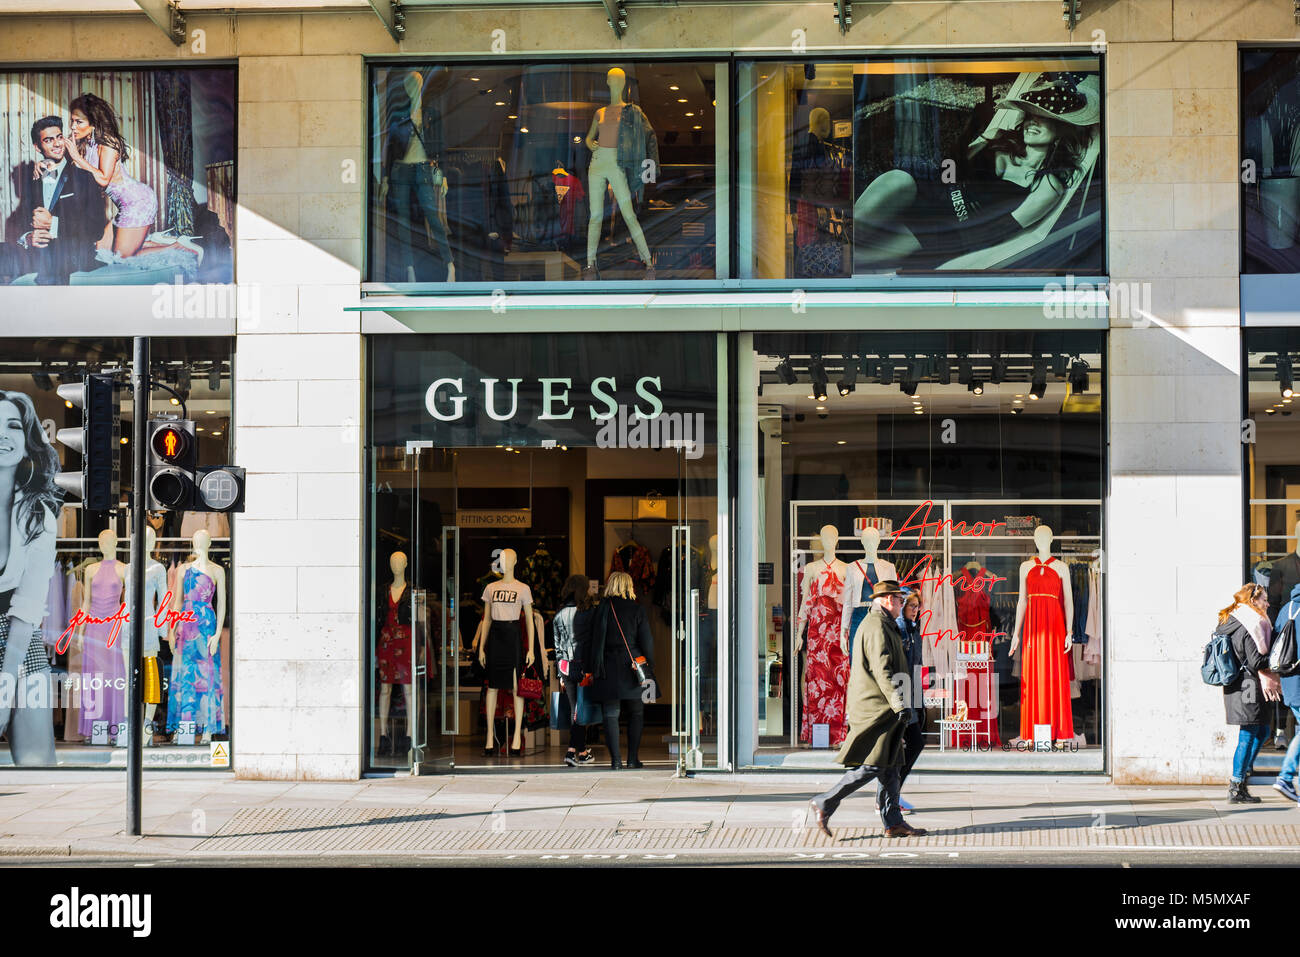 Guess shop store front in Brompton Road, Knightsbridge, London, UK. Shoppers. Stock Photo Alamy